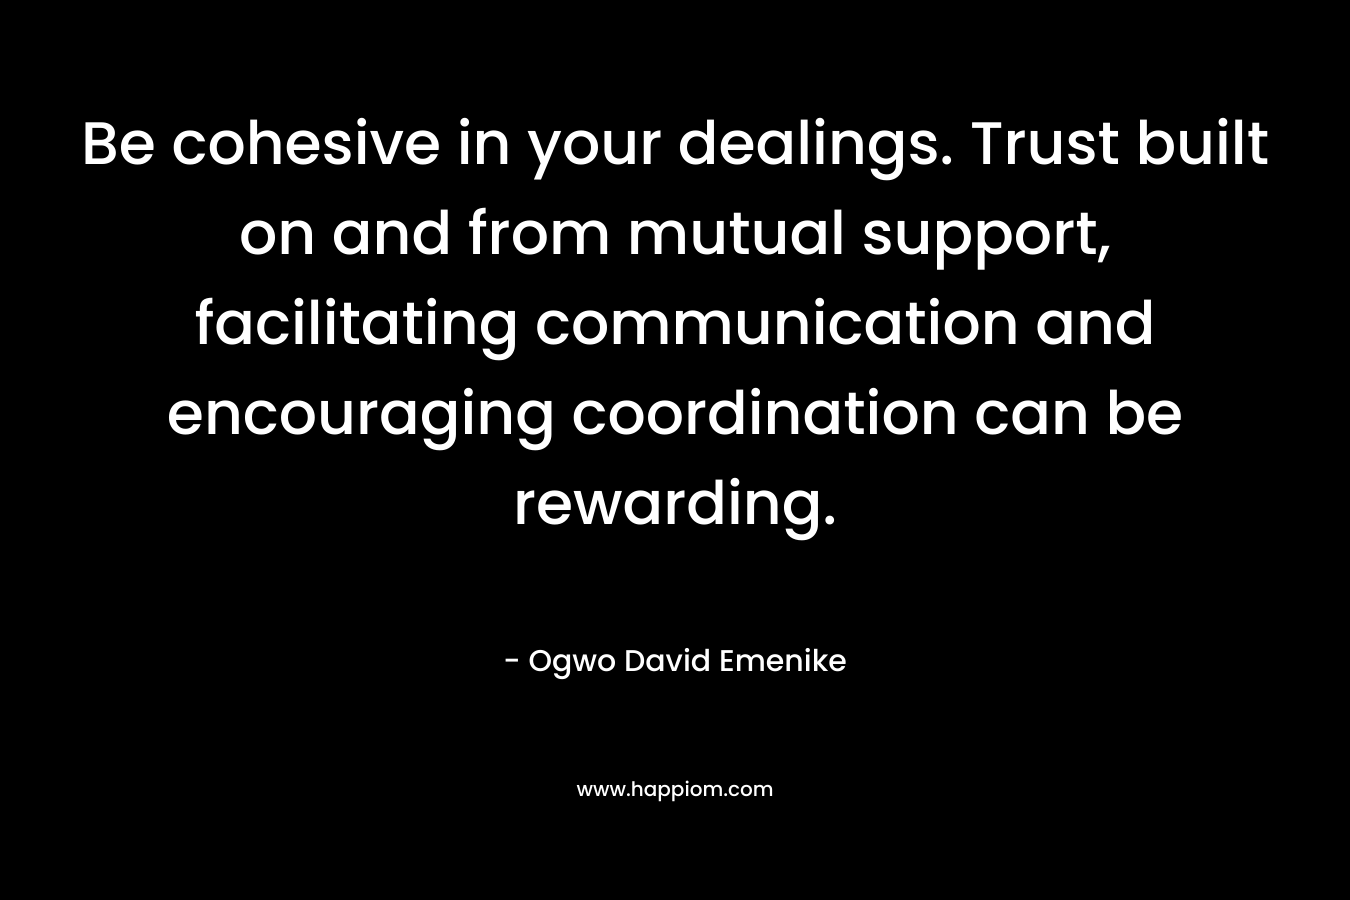 Be cohesive in your dealings. Trust built on and from mutual support, facilitating communication and encouraging coordination can be rewarding.